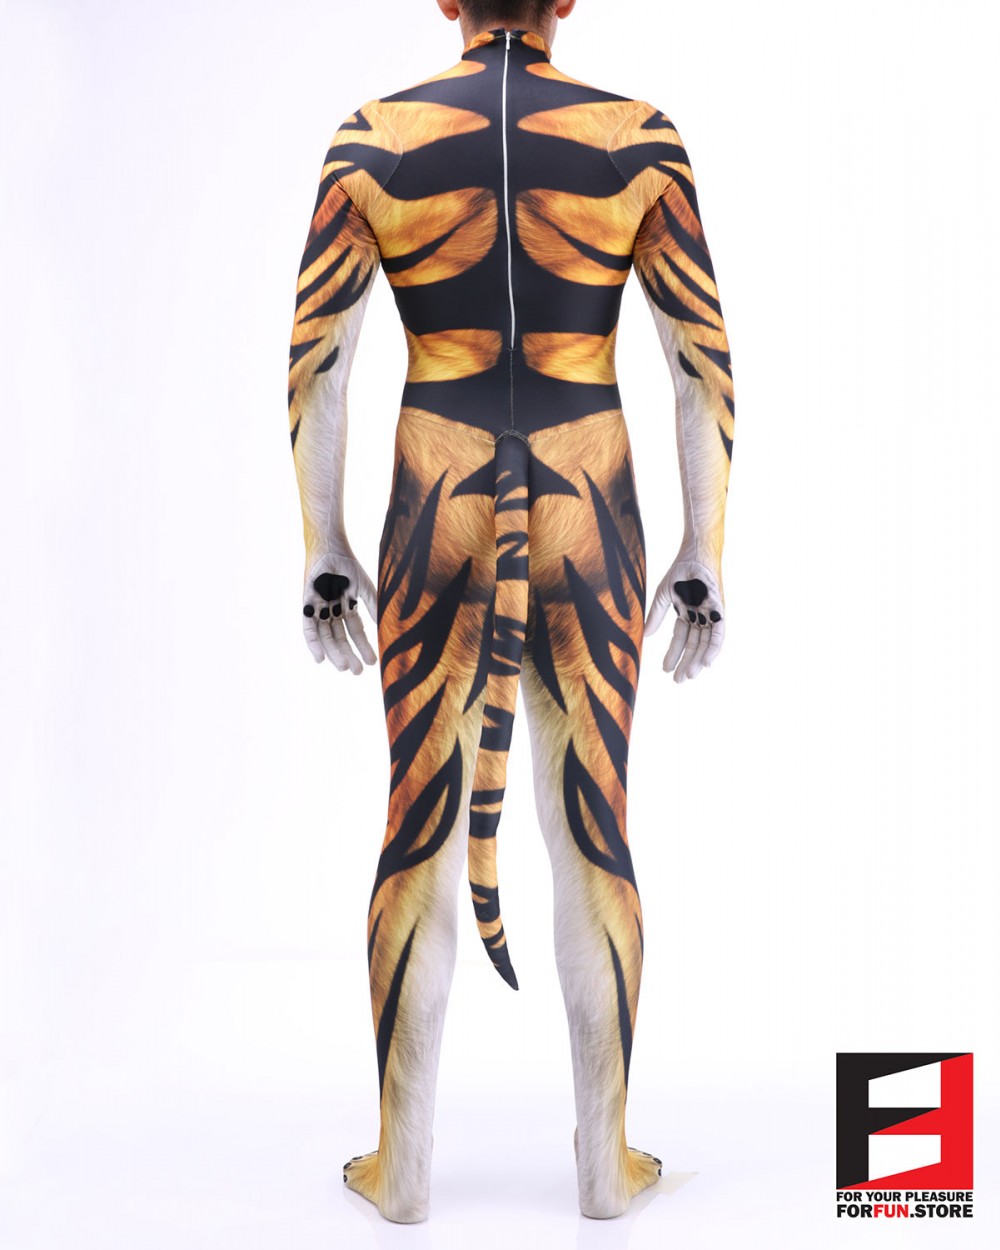 TIGER PETSUIT FOR YOUR PLEASURE : FORFUN